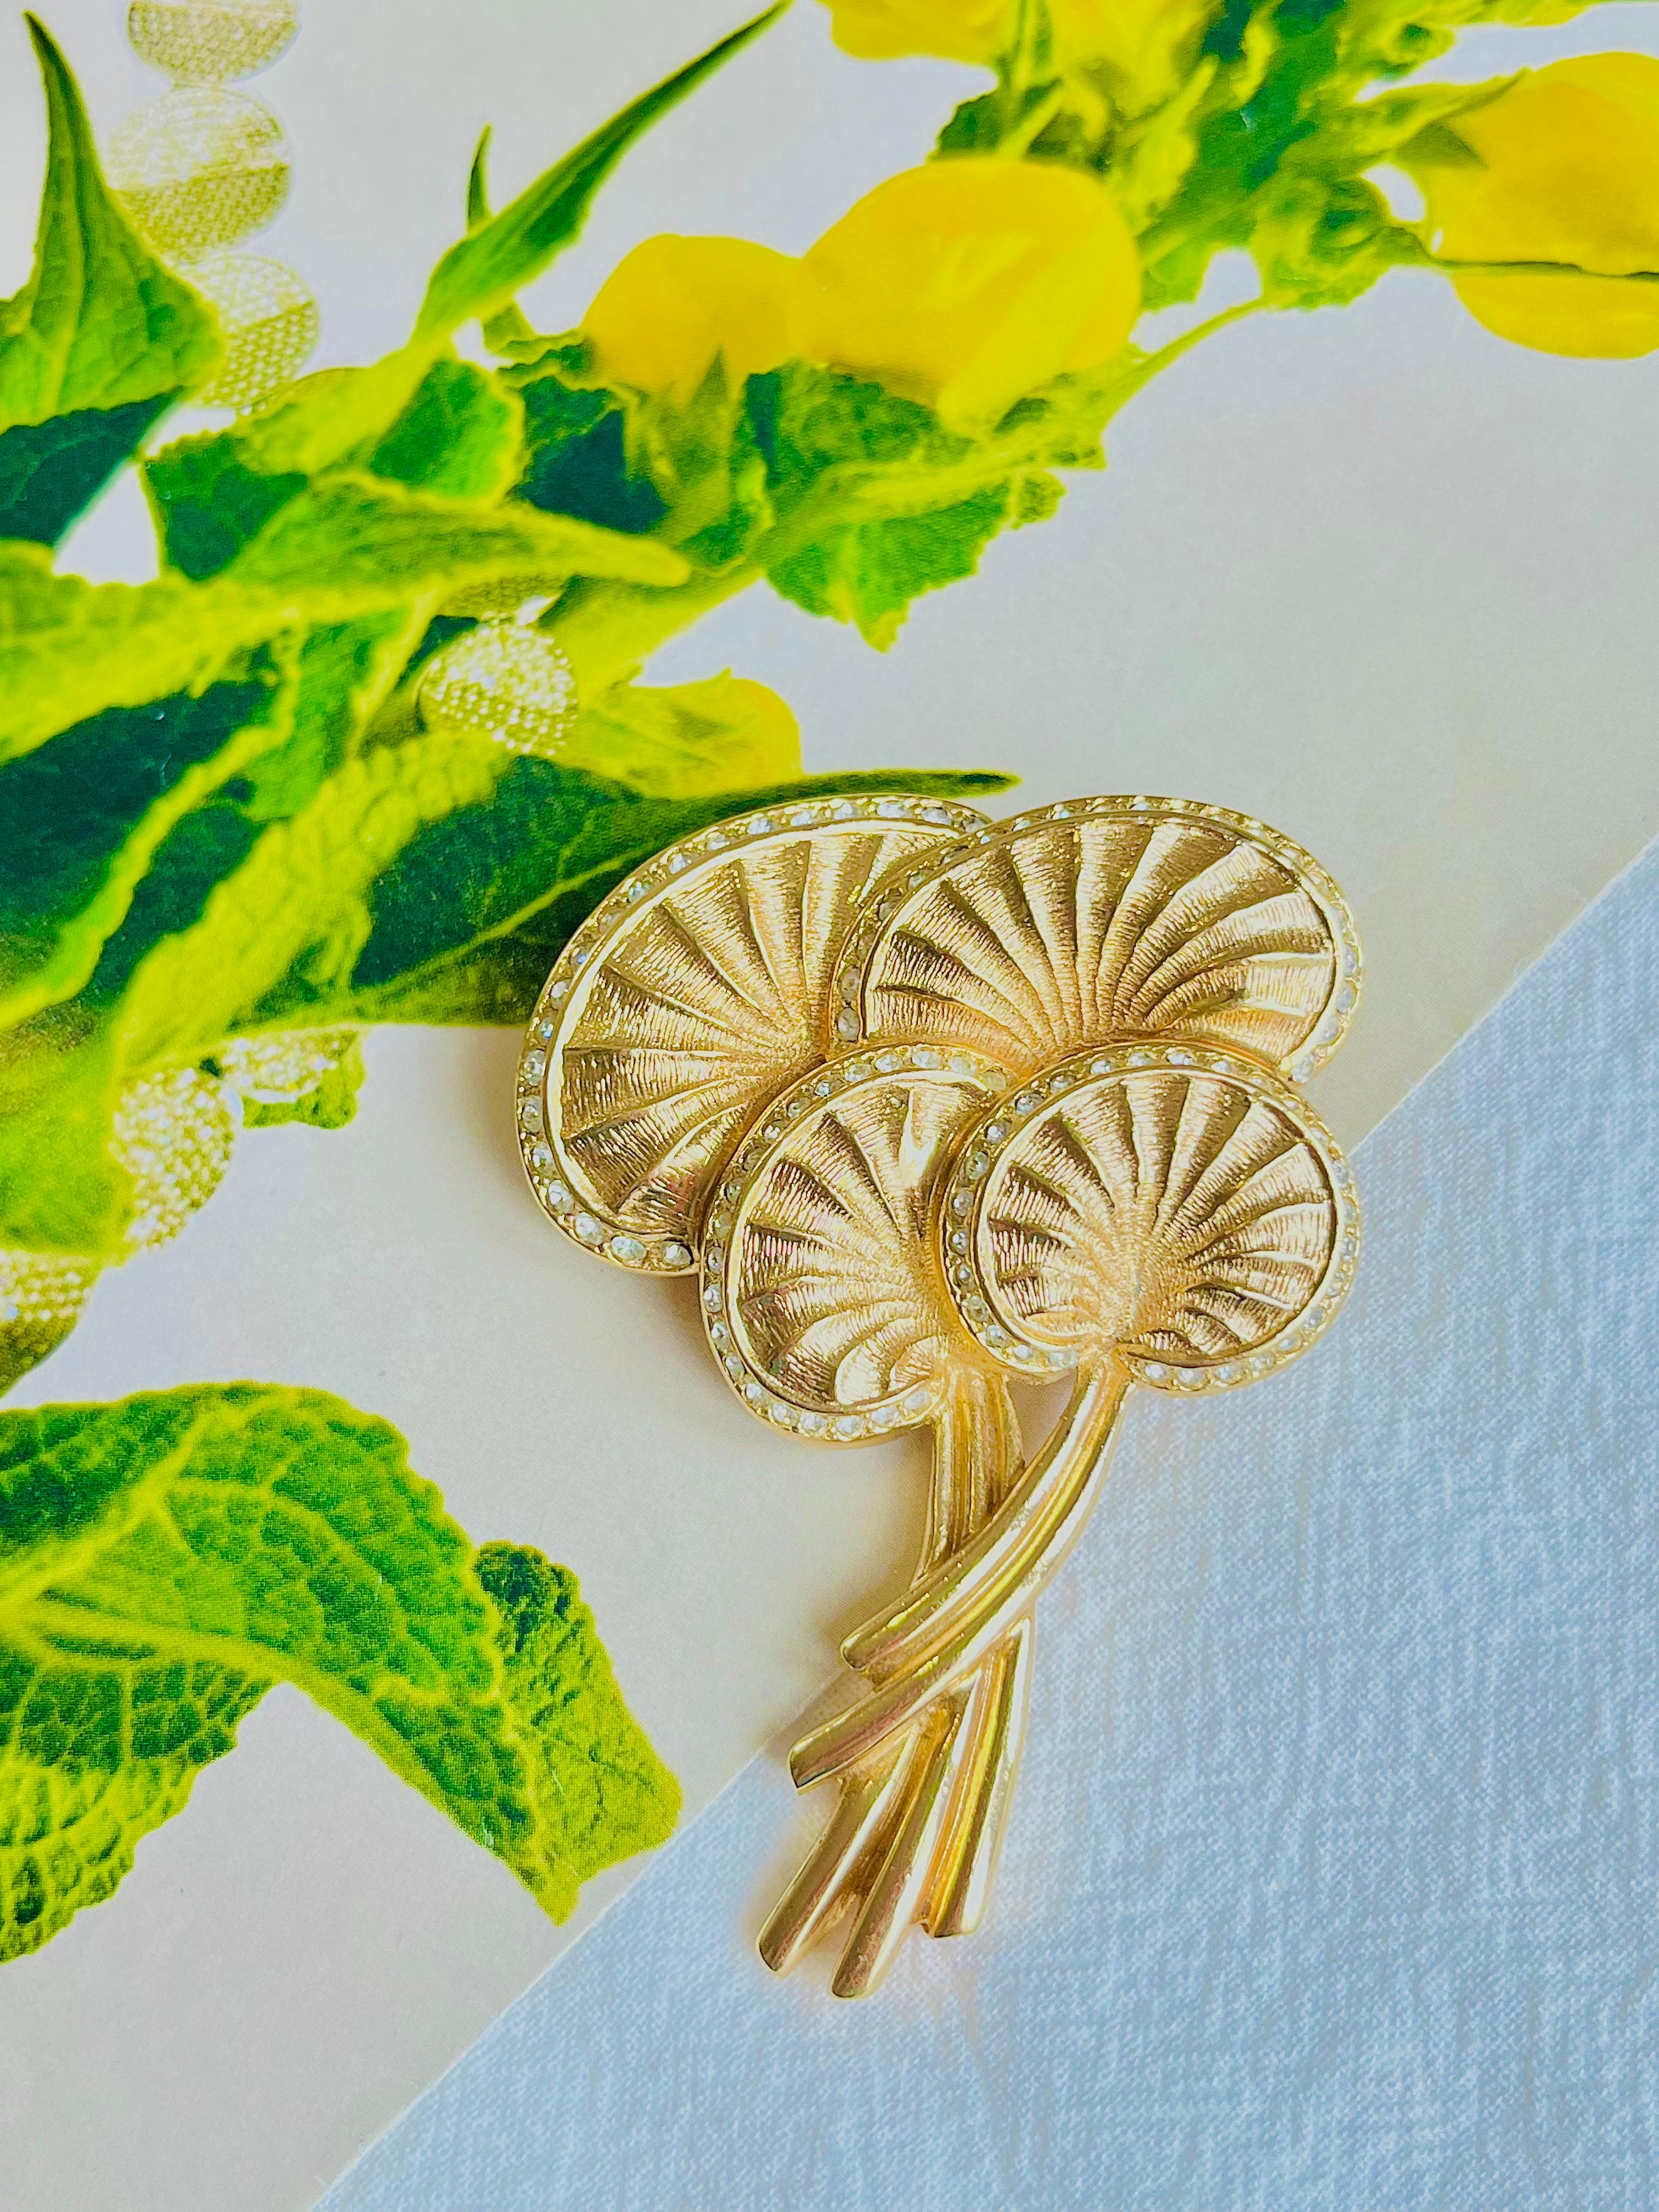 Christian Dior 1970s Vintage Large Mushroom Palm Leaf Crystals Exquisite Brooch, Gold Tone

Very excellent condition. Very new. 100% genuine.

A unique piece. This is gold plated stylised brooch.

Safety-catch pin closure.

Size: 7.0 cm x 5.0